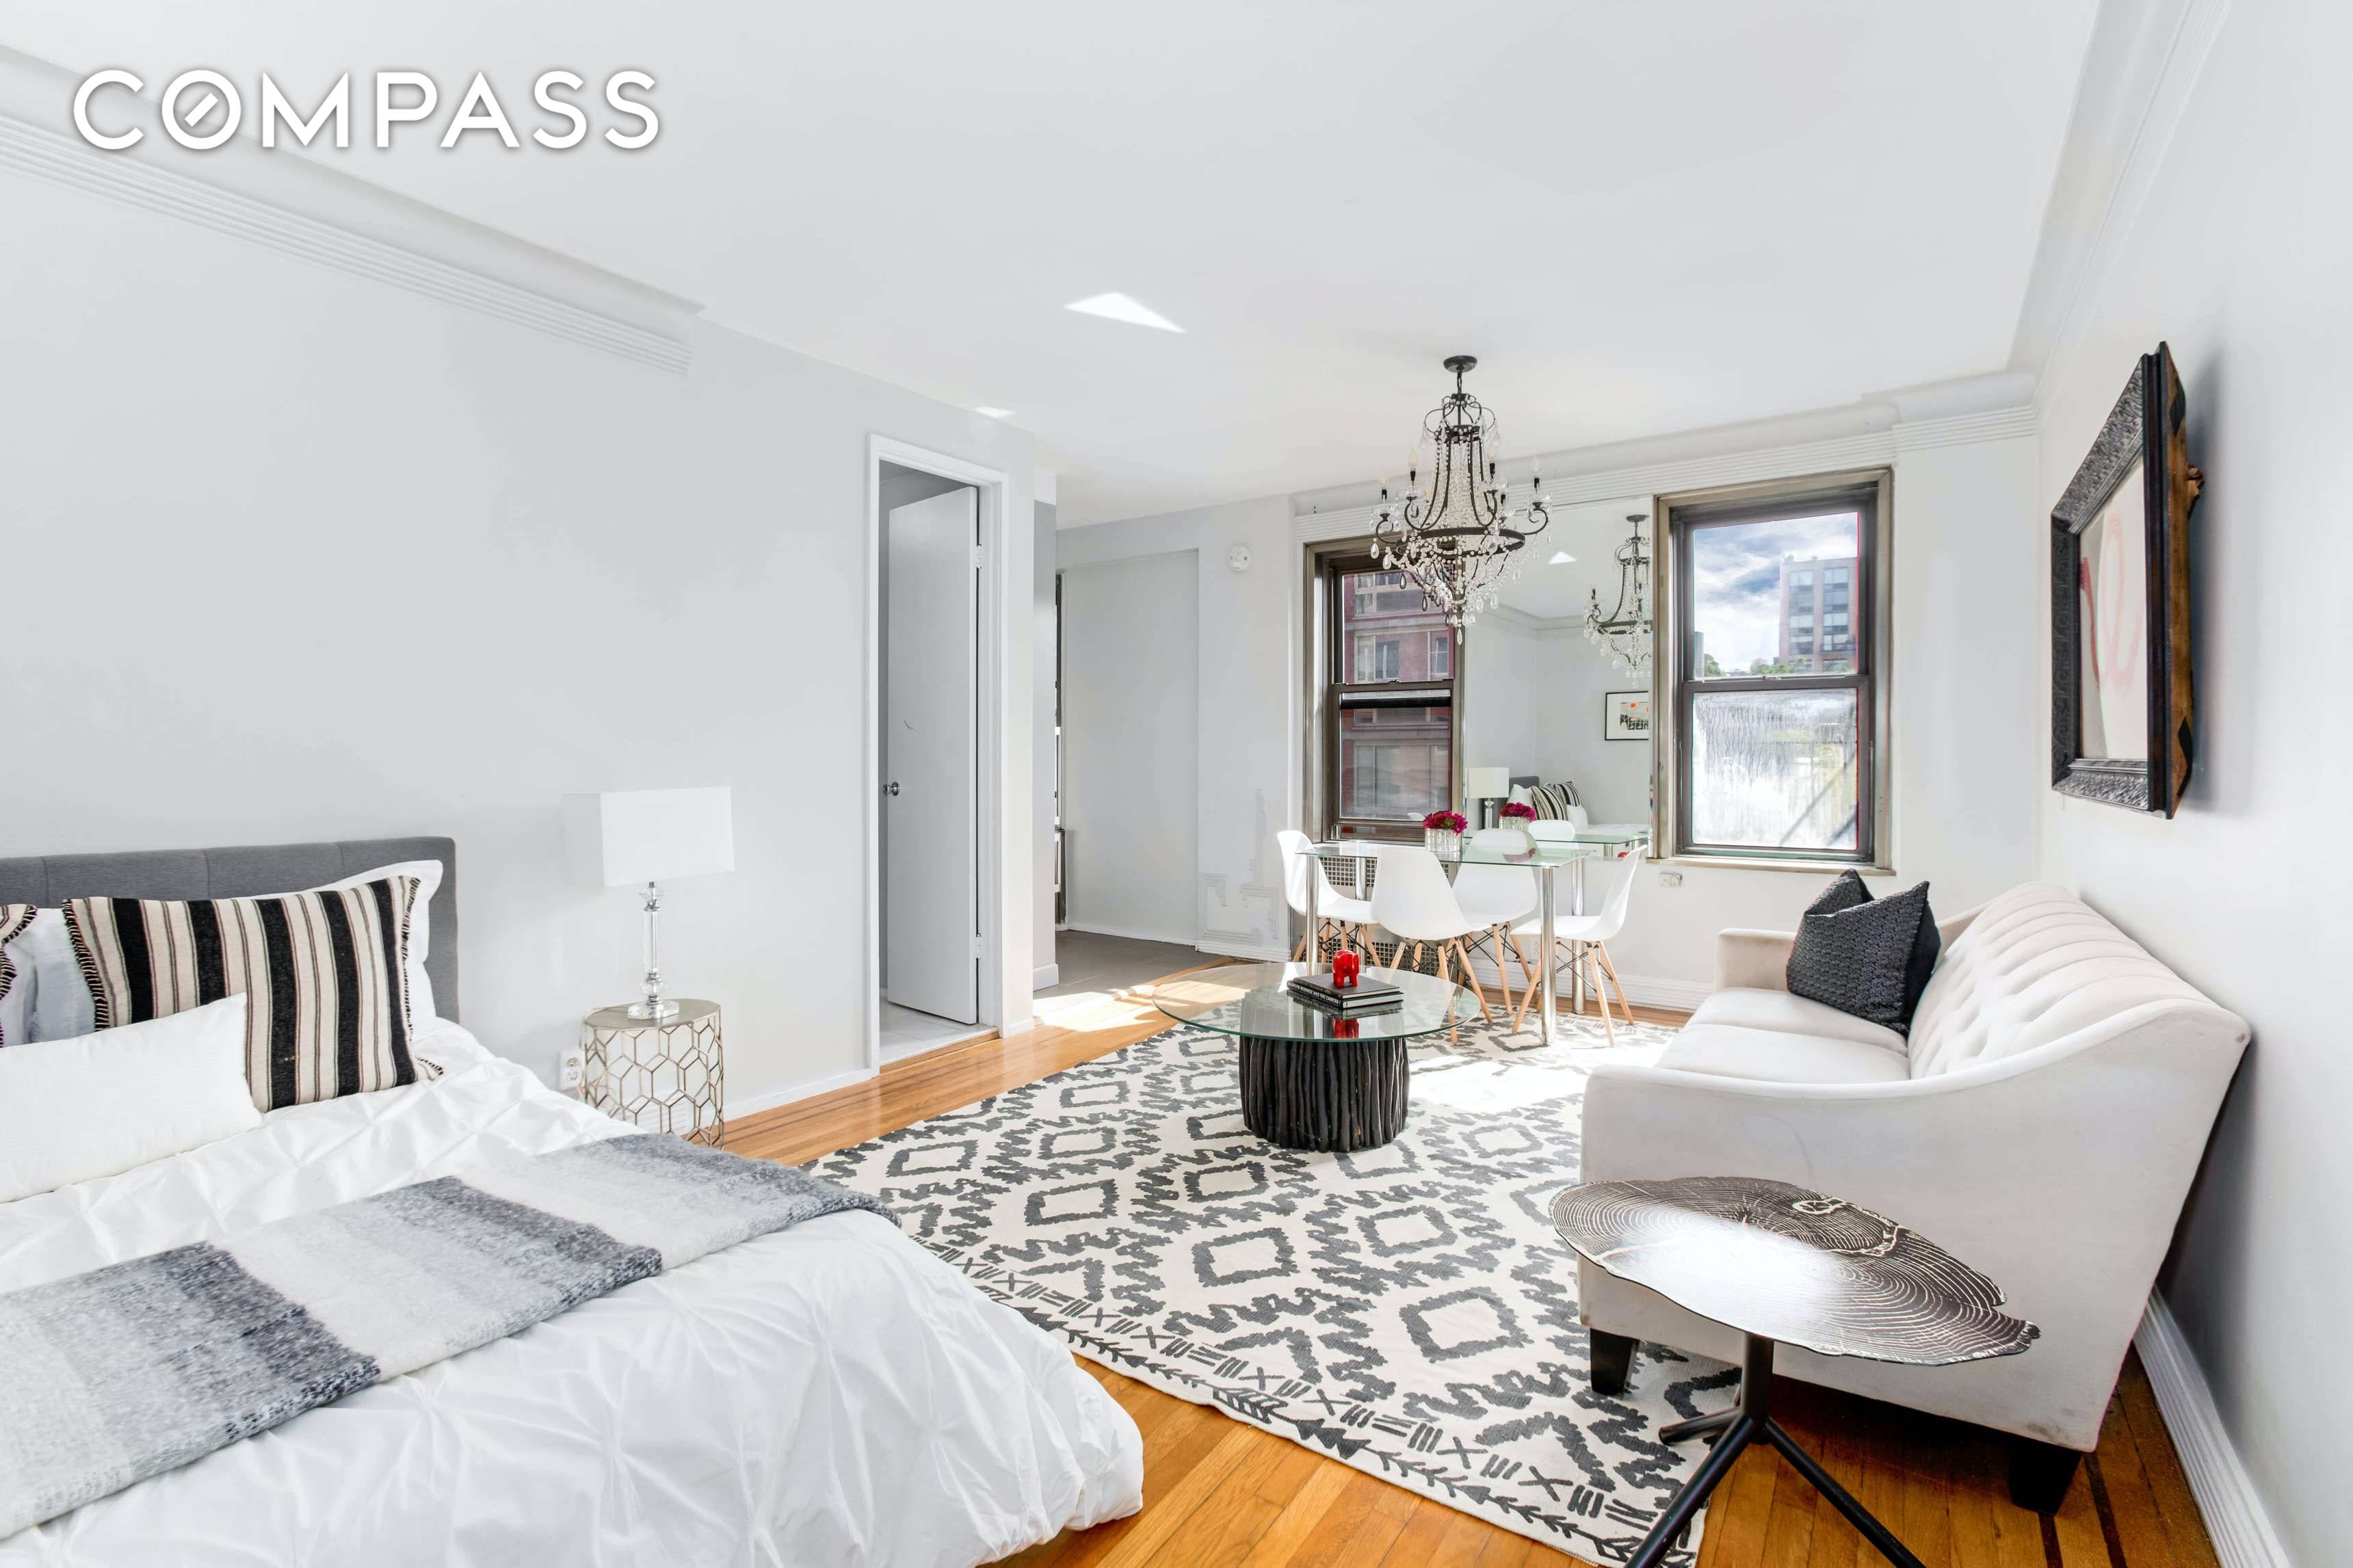 Combining a smart use of space, modern updates and charming architectural details, this bright studio is a sunny and serene haven in an inviting Chelsea co op building.